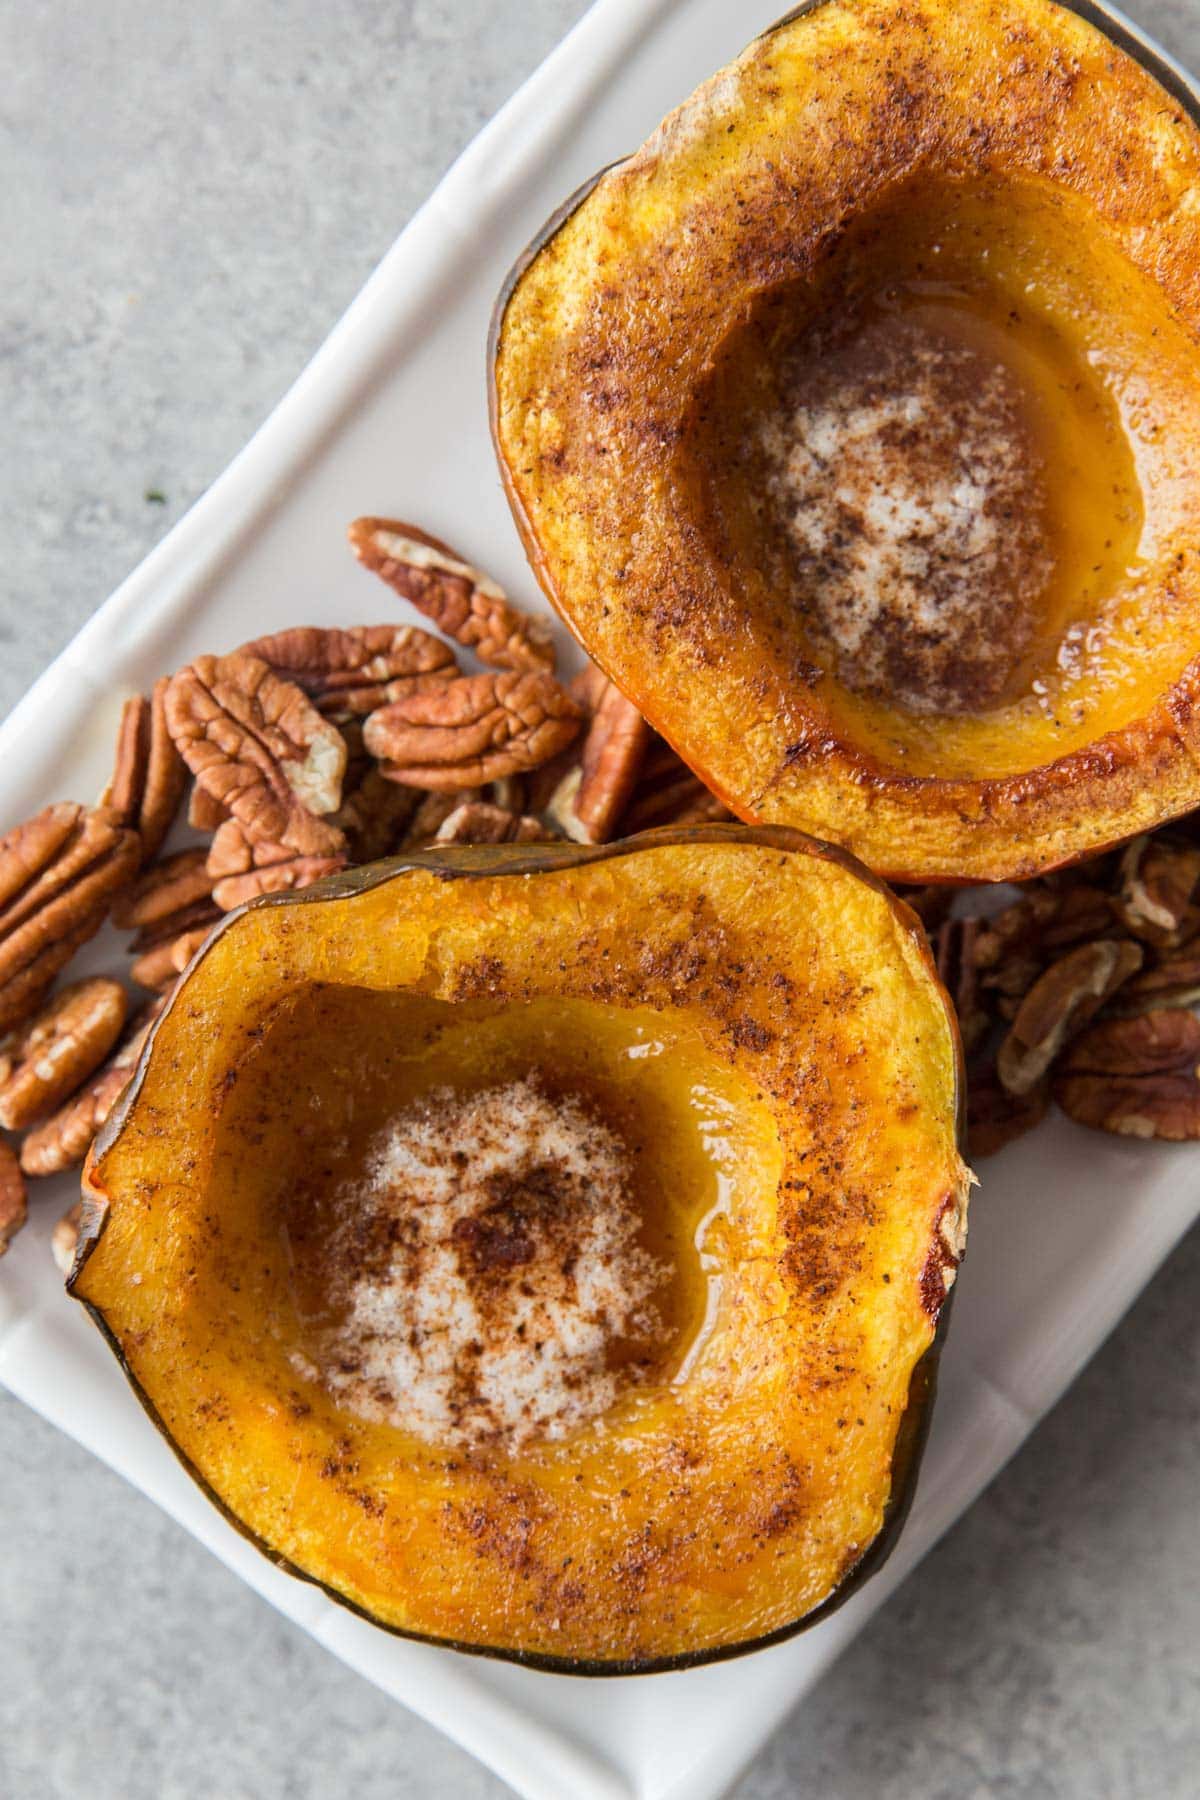 acorn squash halves, baked and filled with melted butter and spices